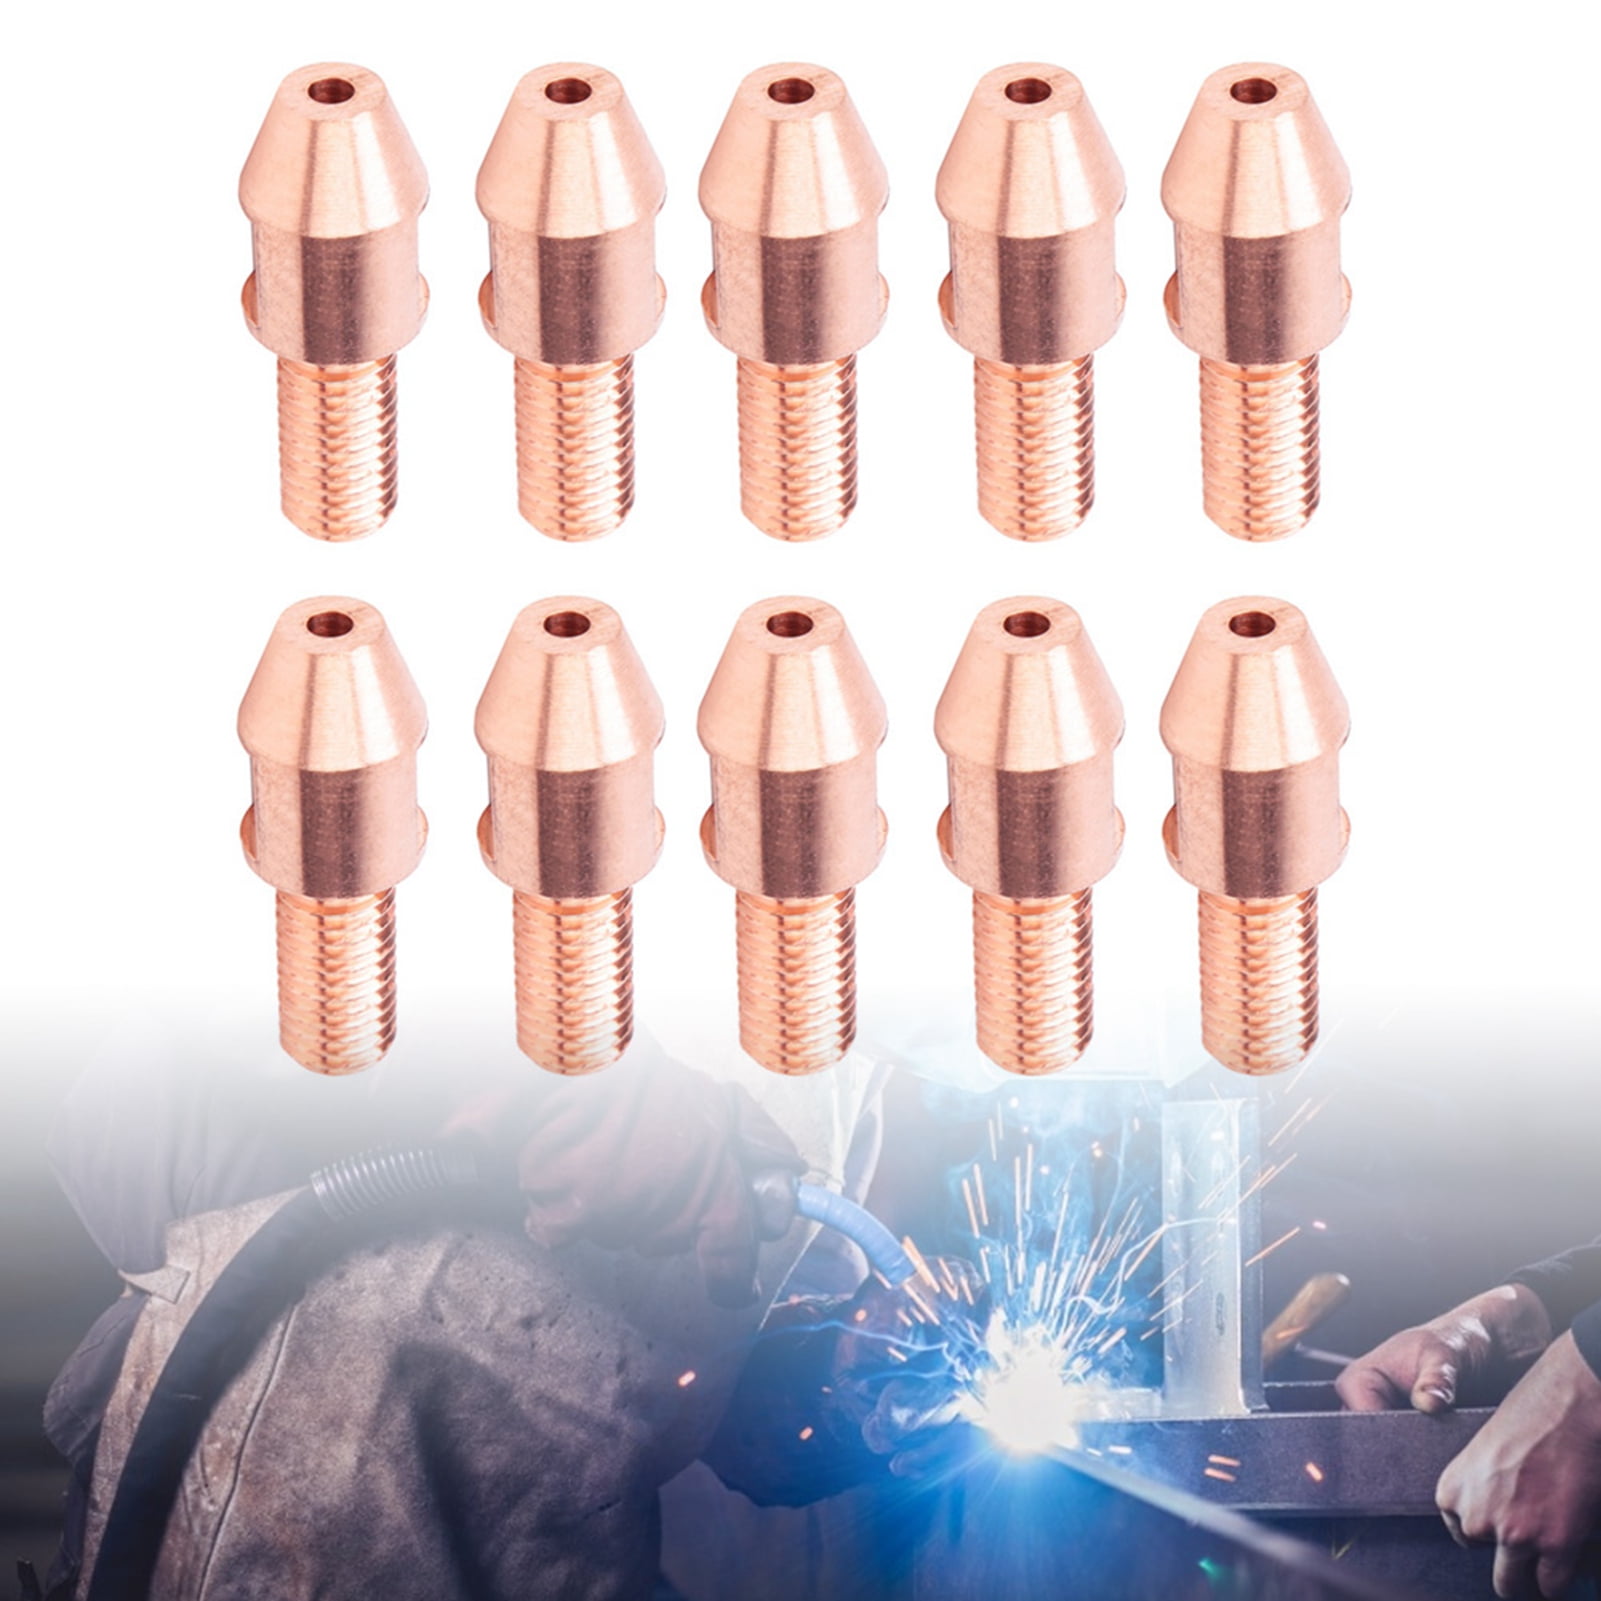 10Pcs Welding Contact Tips Standard Size Welding Nozzle 4mm Hole Diameter M12 for Repalcement Machinery Processing Submerged Air Welding 5.0 